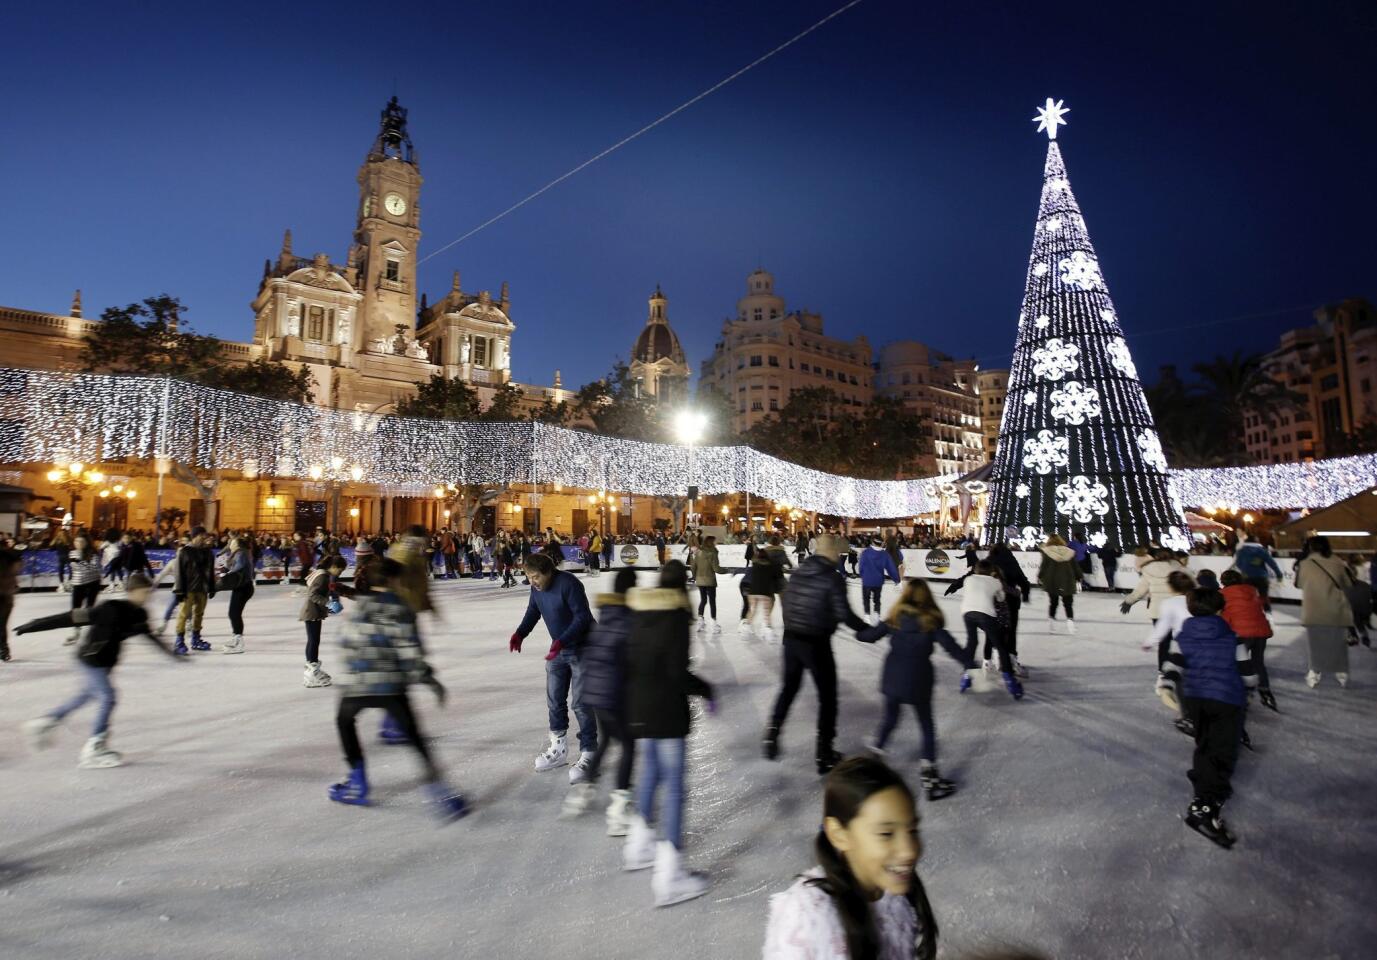 People enjoy an ice-skating rink at the Town Hall square in Valencia.